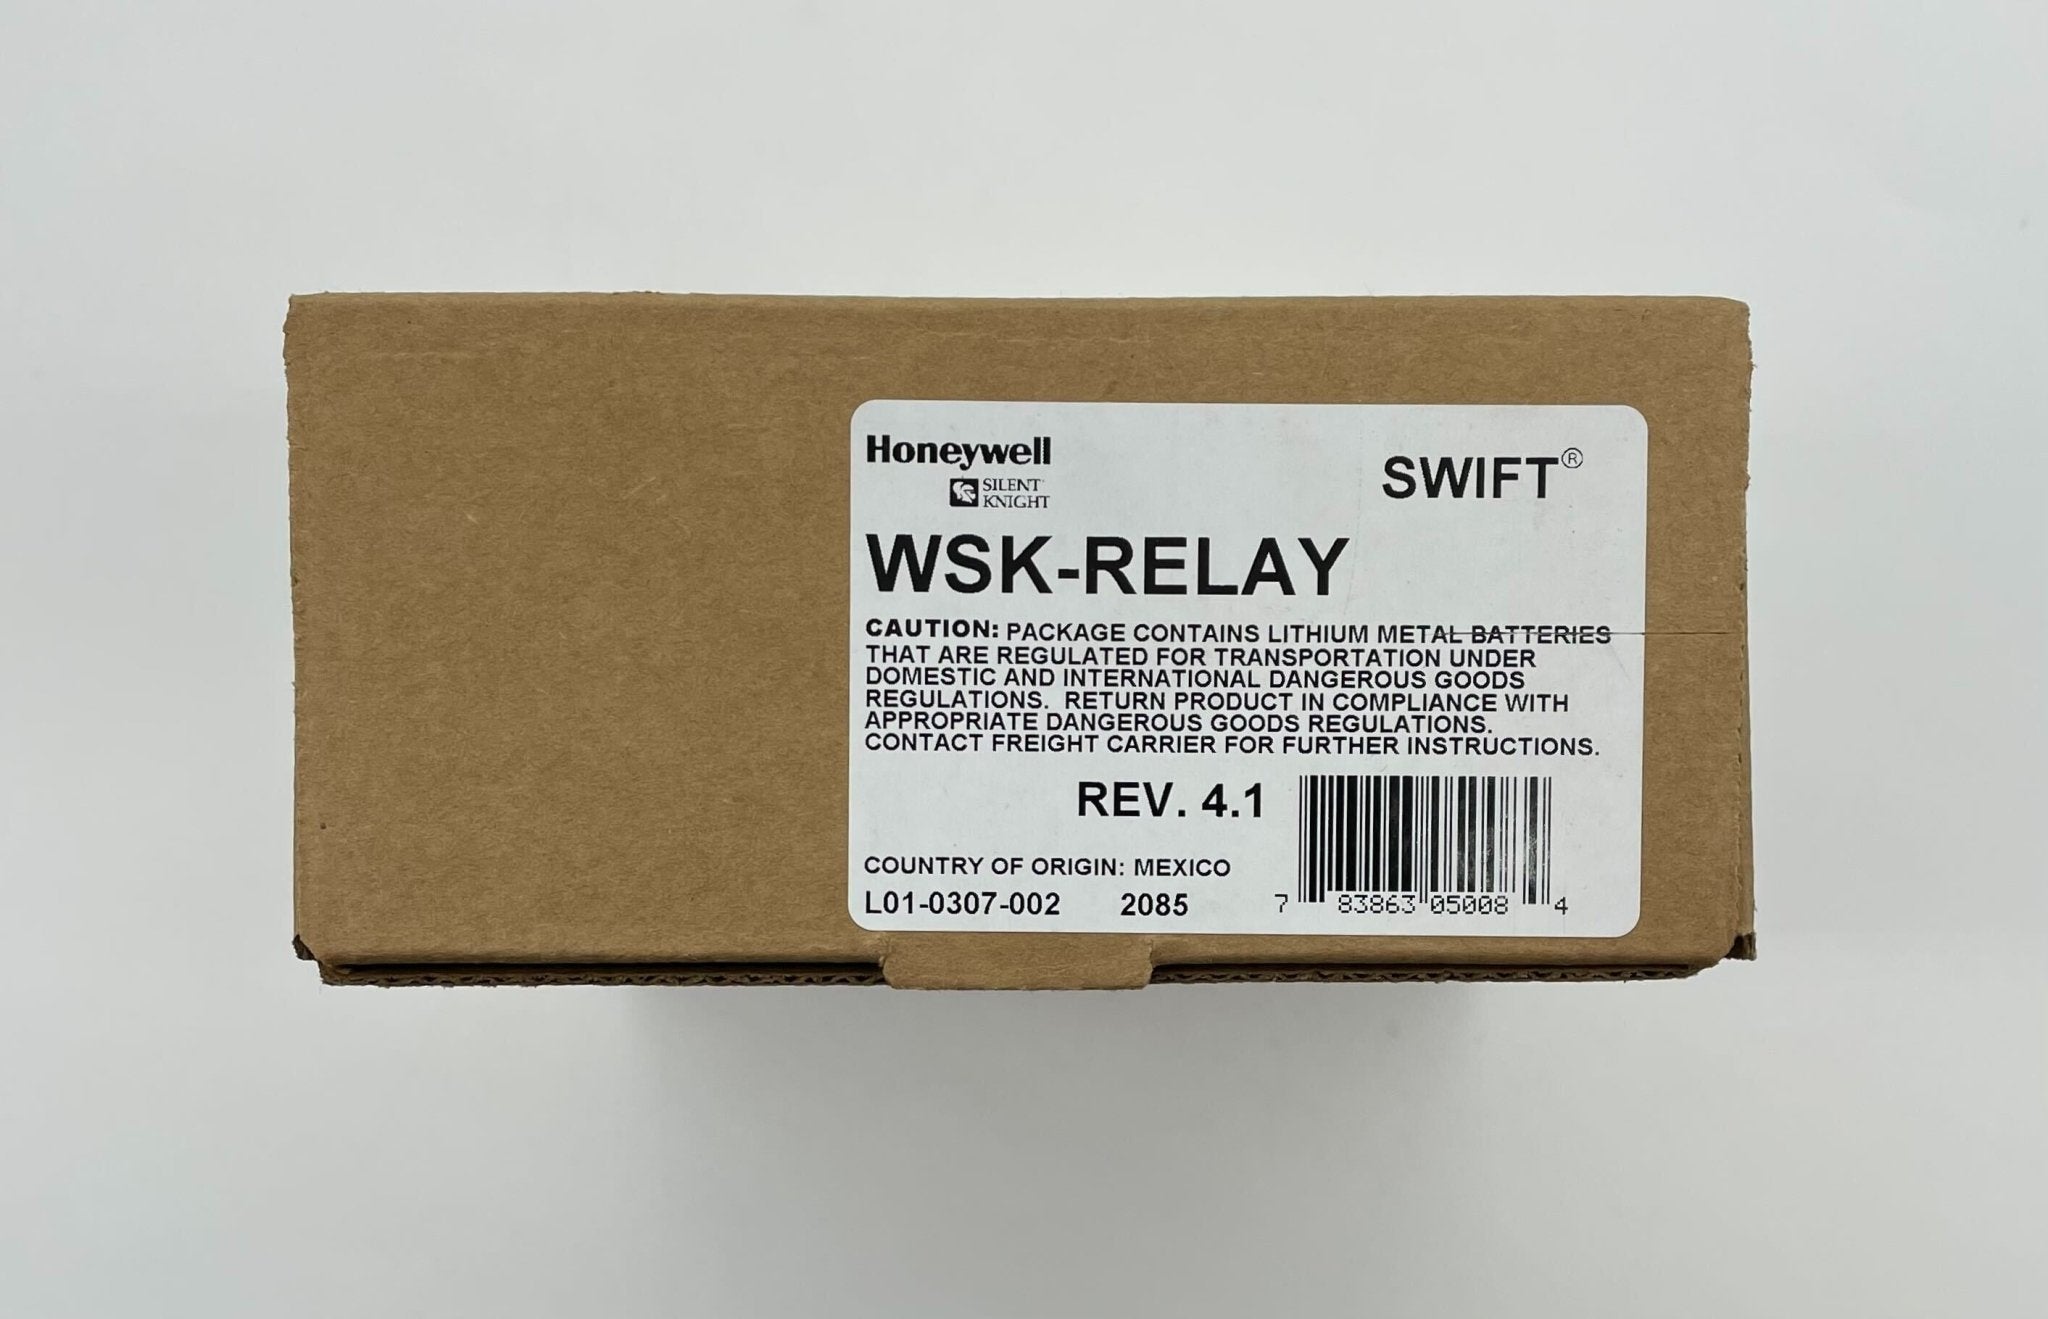 Silent Knight WSK-RELAY - The Fire Alarm Supplier